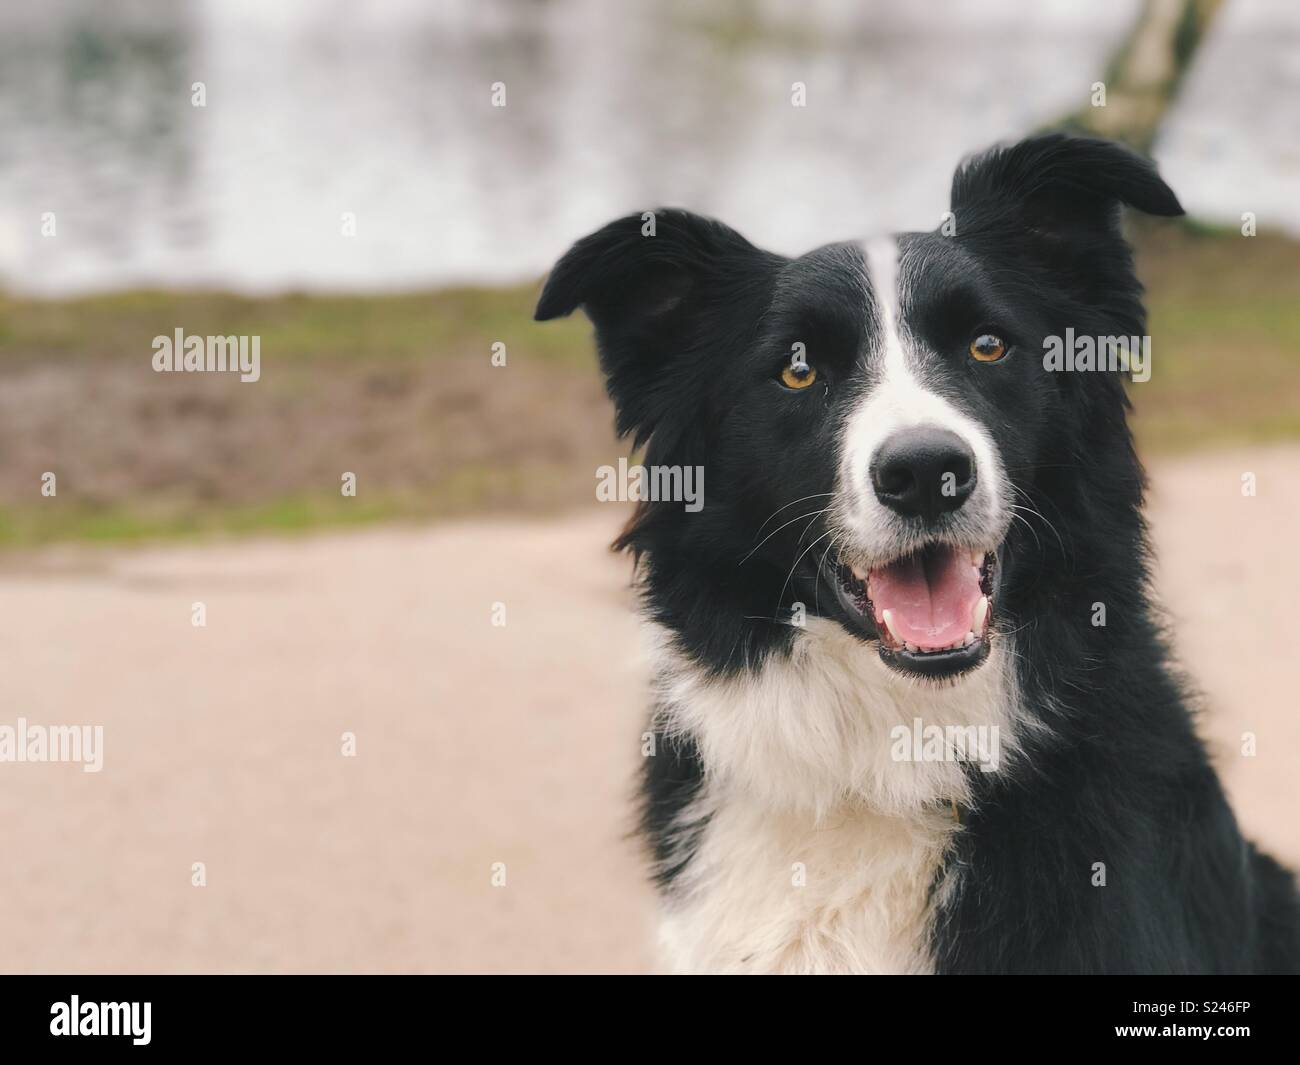 A headshot of a border collie looking happy with his mouth open and ears pricked up. Stock Photo